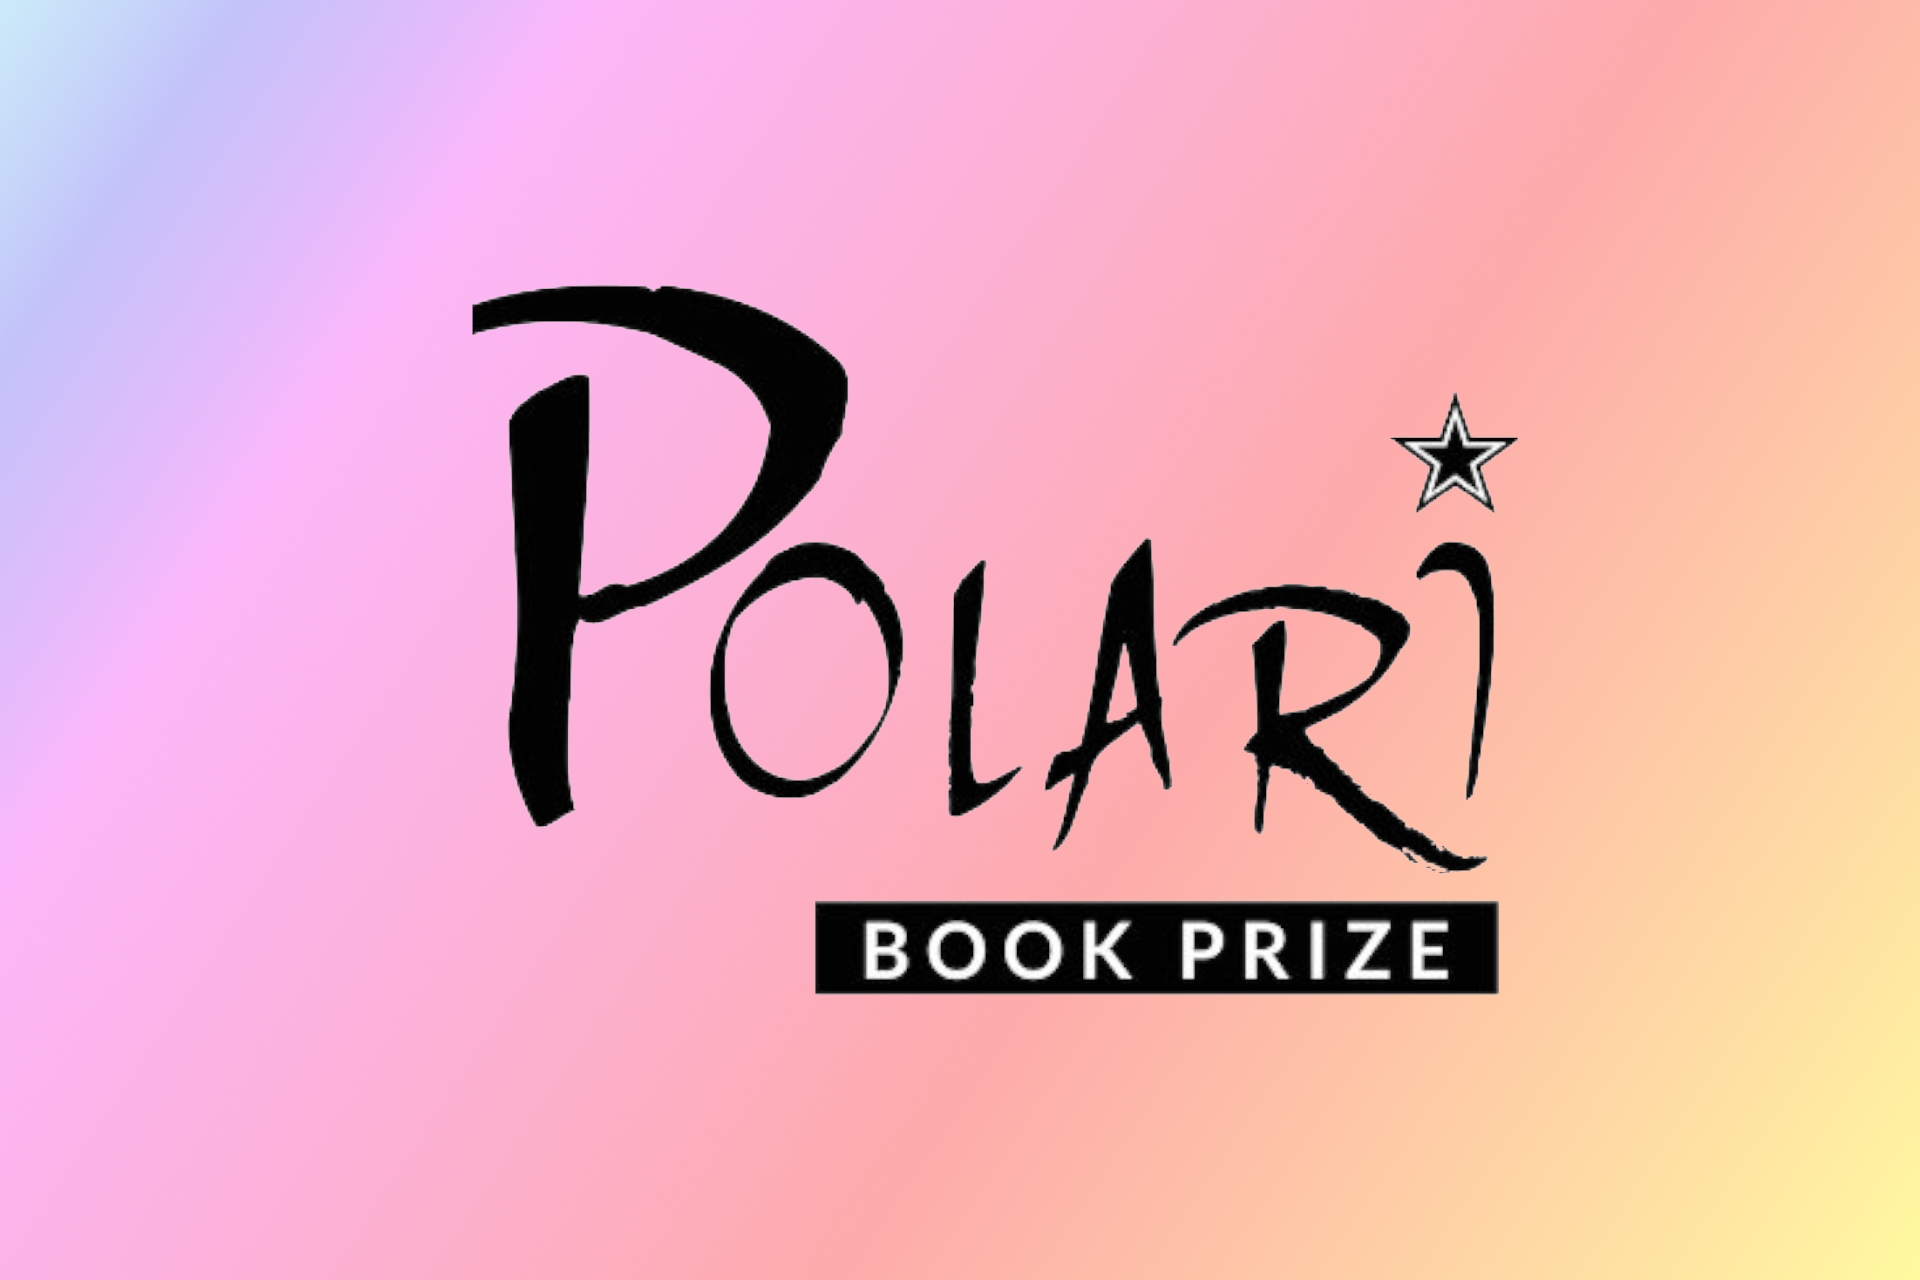 Polari Prize, the UK’s first and largest LGBTQ+ book award, celebrates their 2022 shortlists